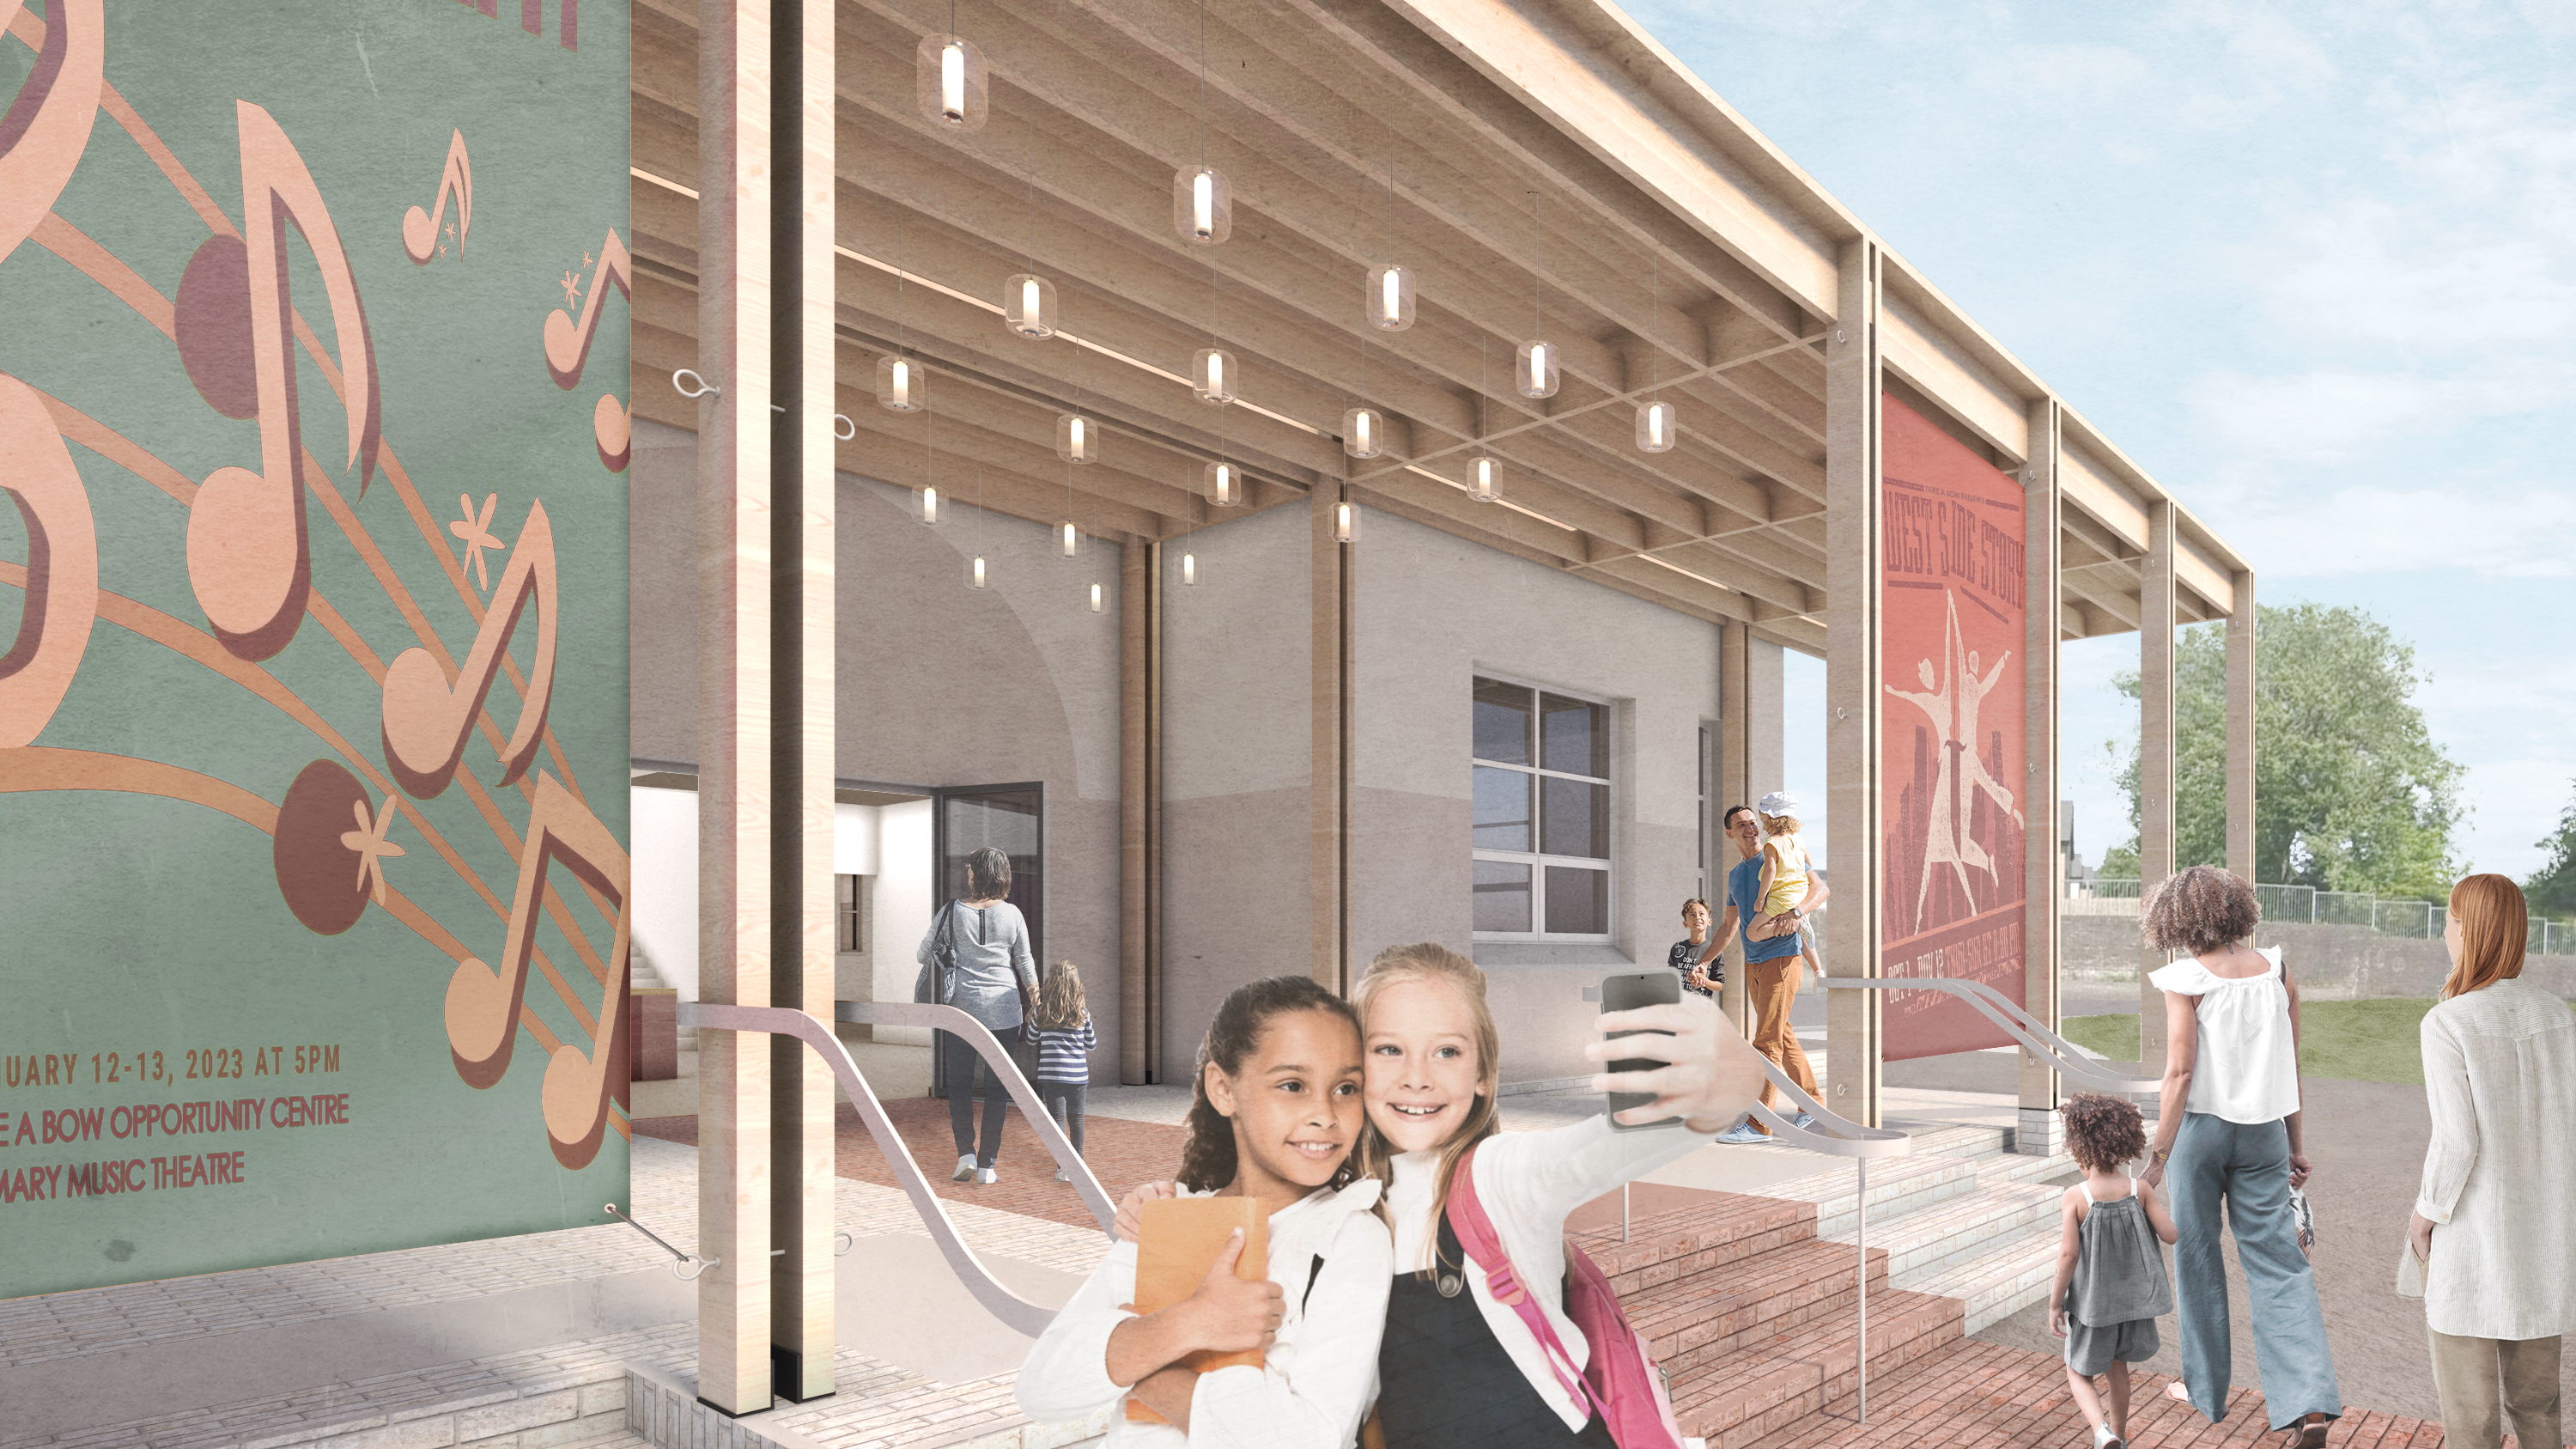 O’DonnellBrown gets green light to revamp Kilmarnock community centre